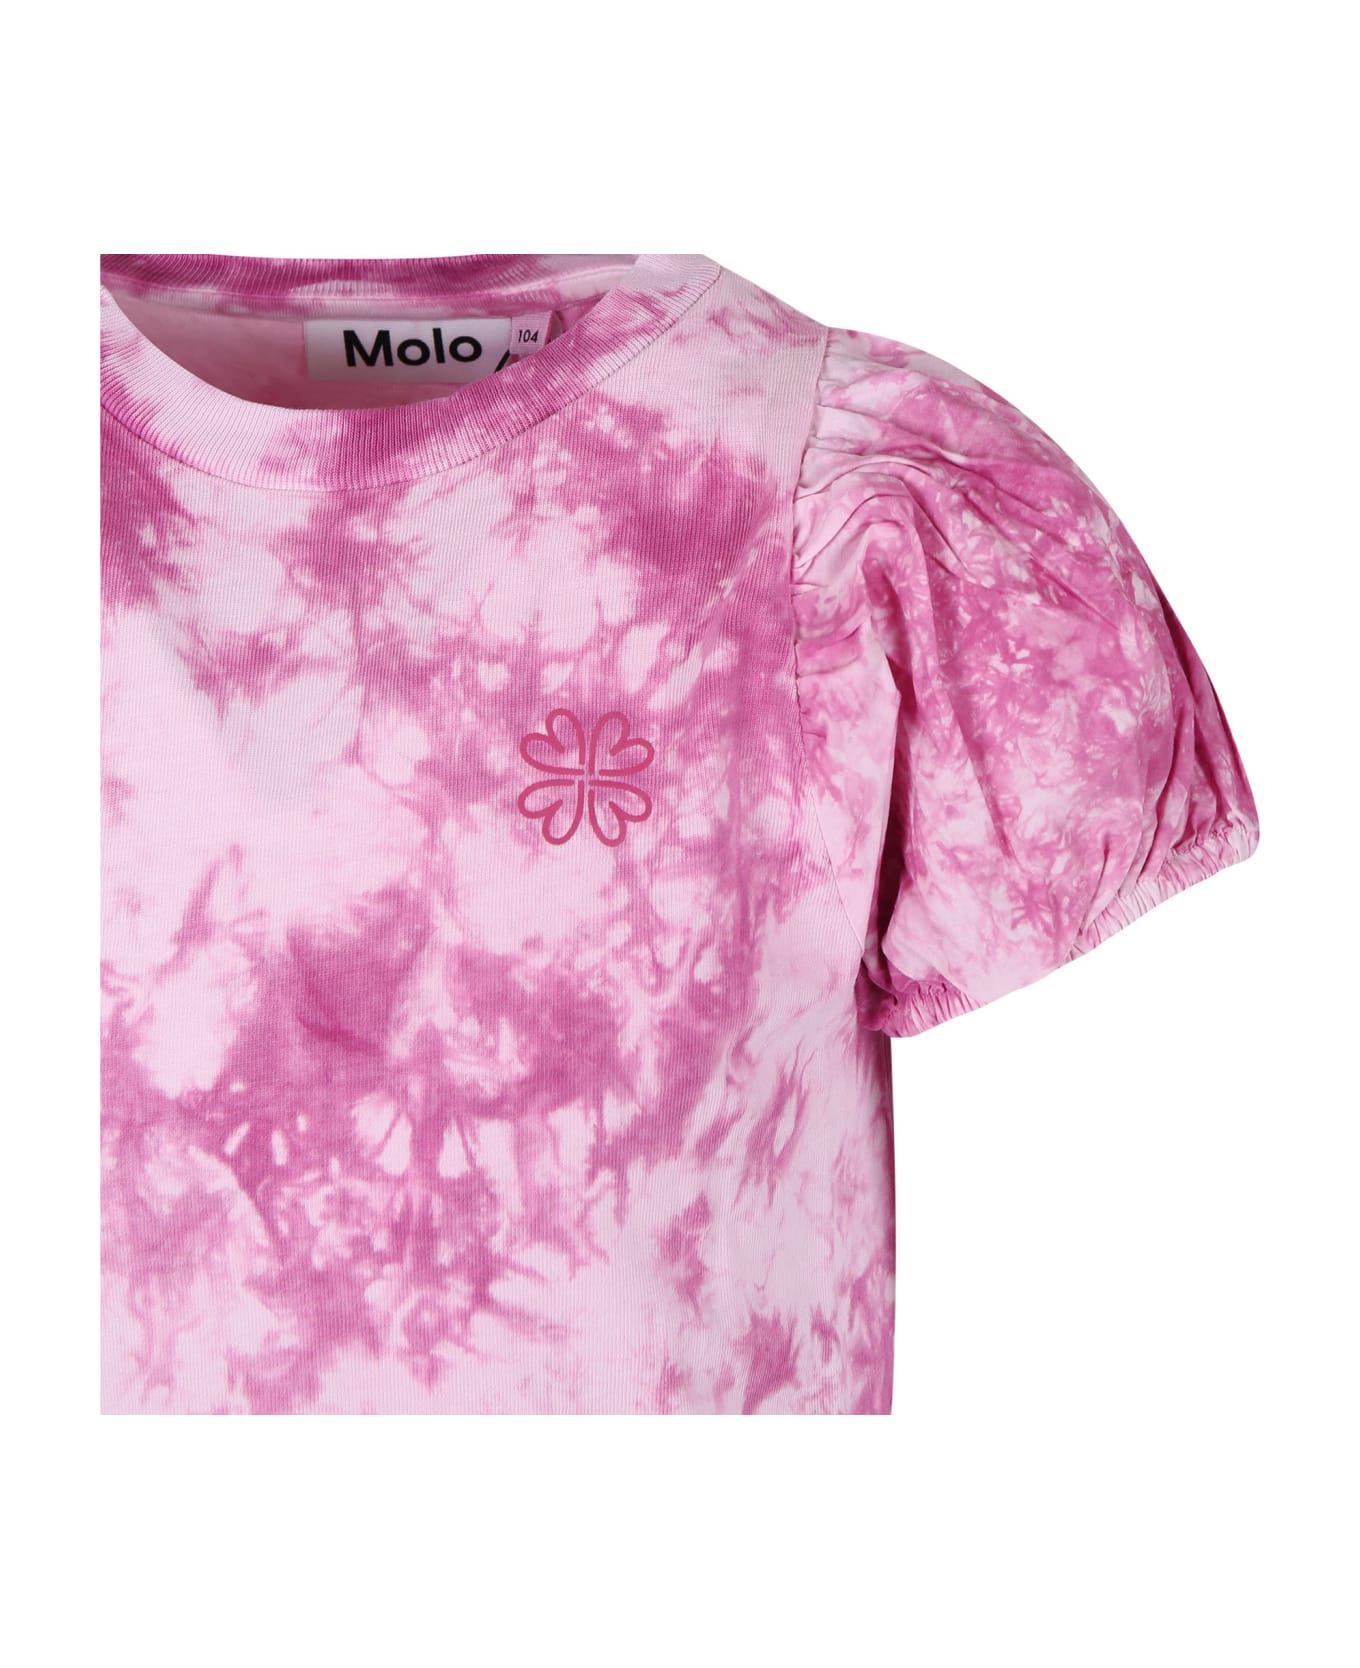 Molo Pink T-shirt For Girl With Tie Dye - Pink